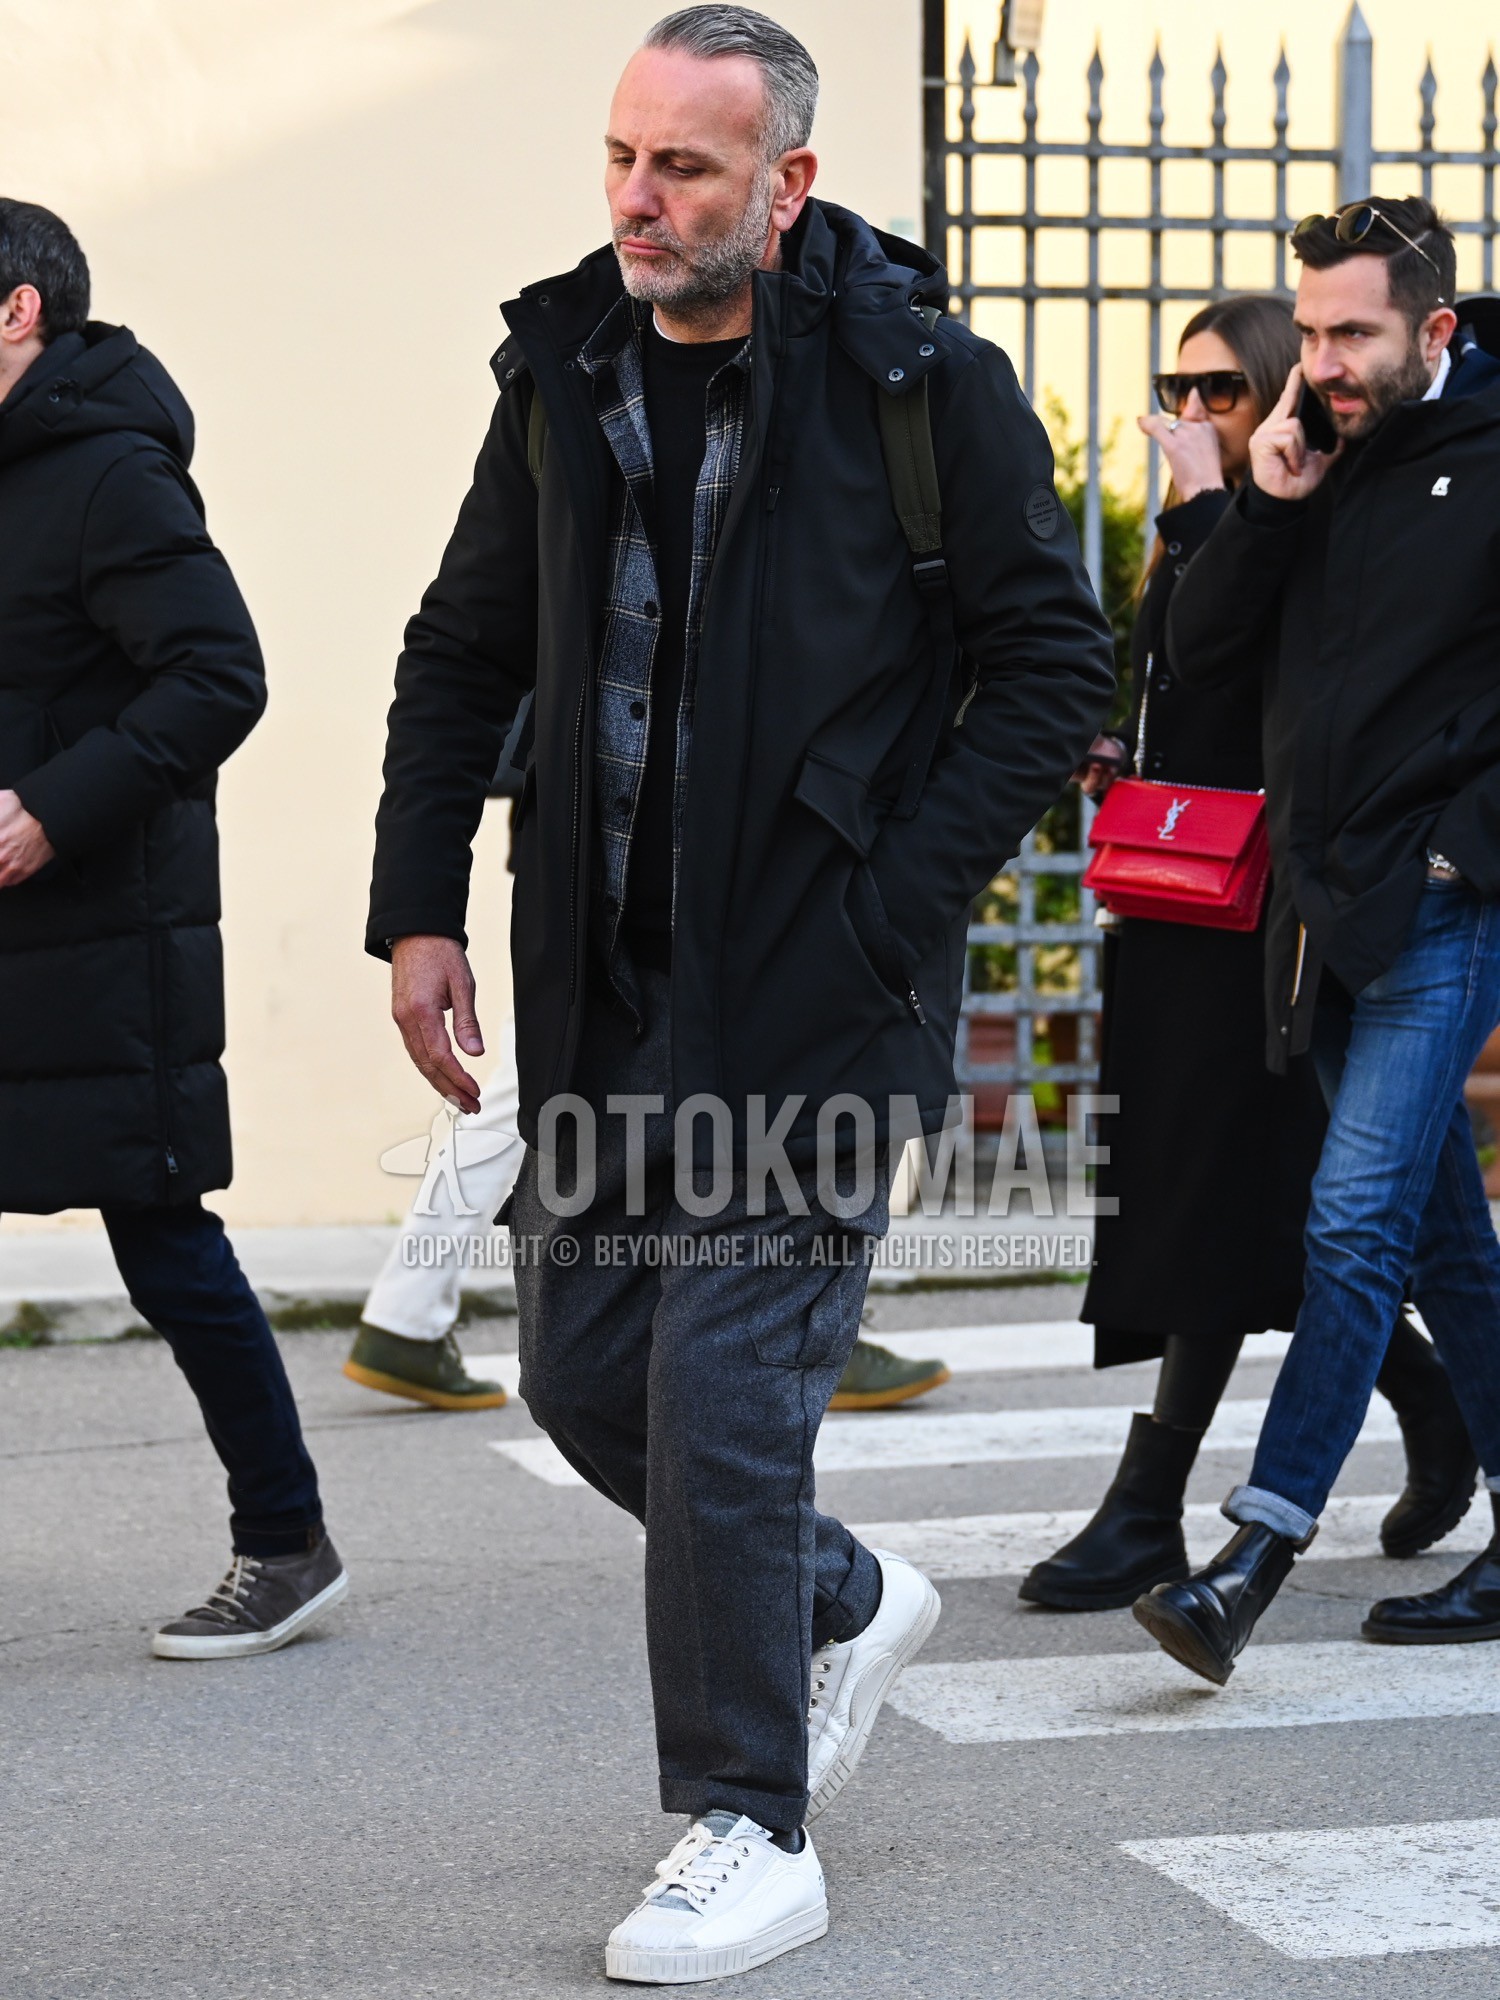 Men's autumn winter outfit with black plain hooded coat, navy check shirt, black plain long sleeve t-shirt, gray plain cargo pants, white low-cut sneakers, olive green plain backpack.